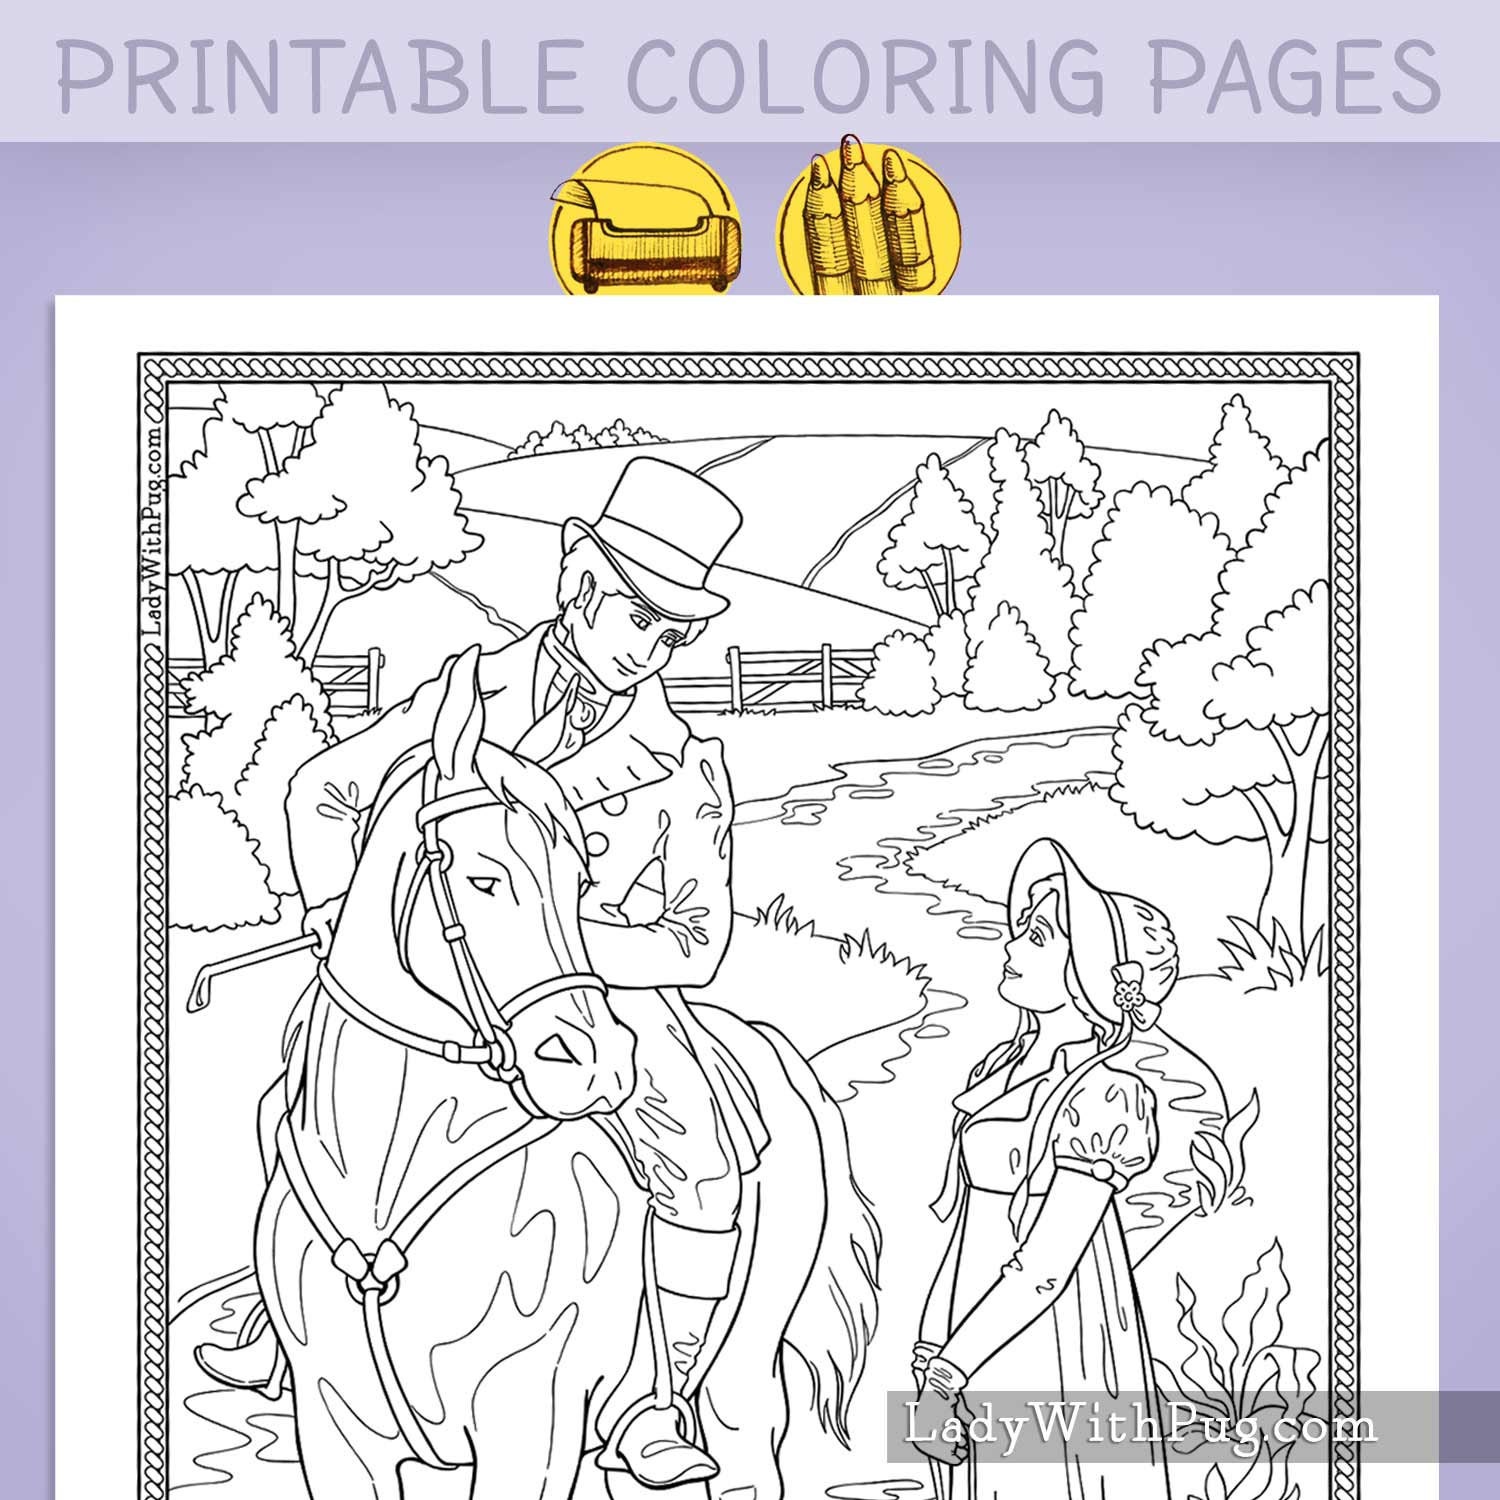 Adult Coloring Page: Lady and Gentleman on Horse. Line Art | Etsy